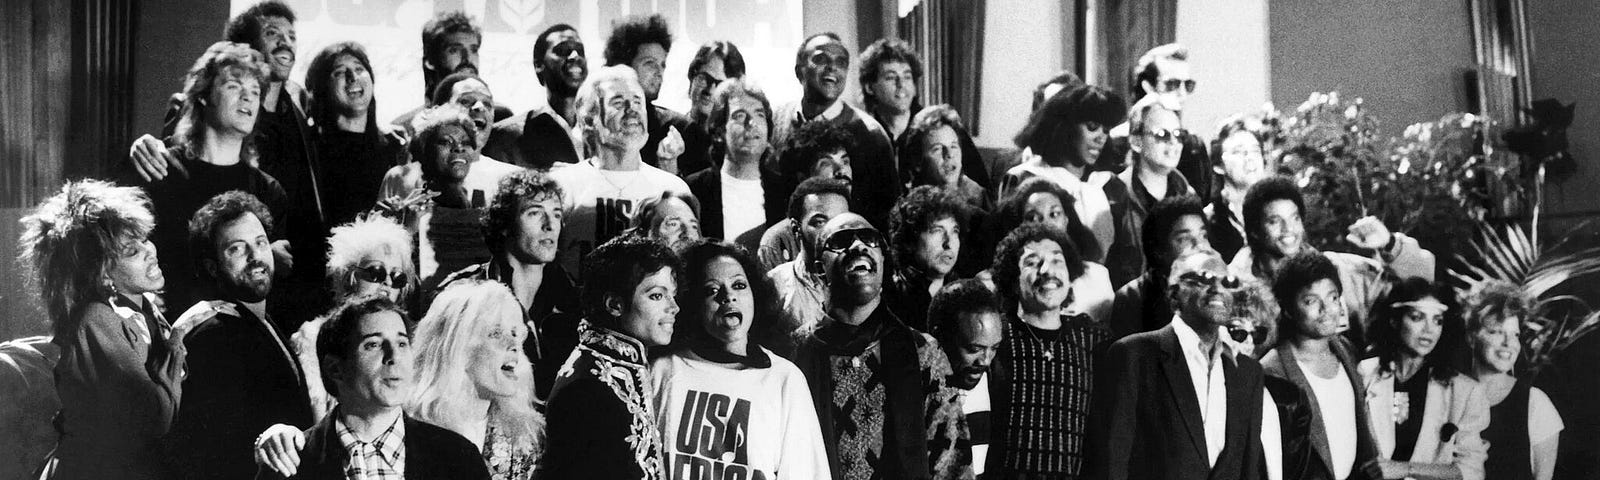 We Are The World singers in 1985